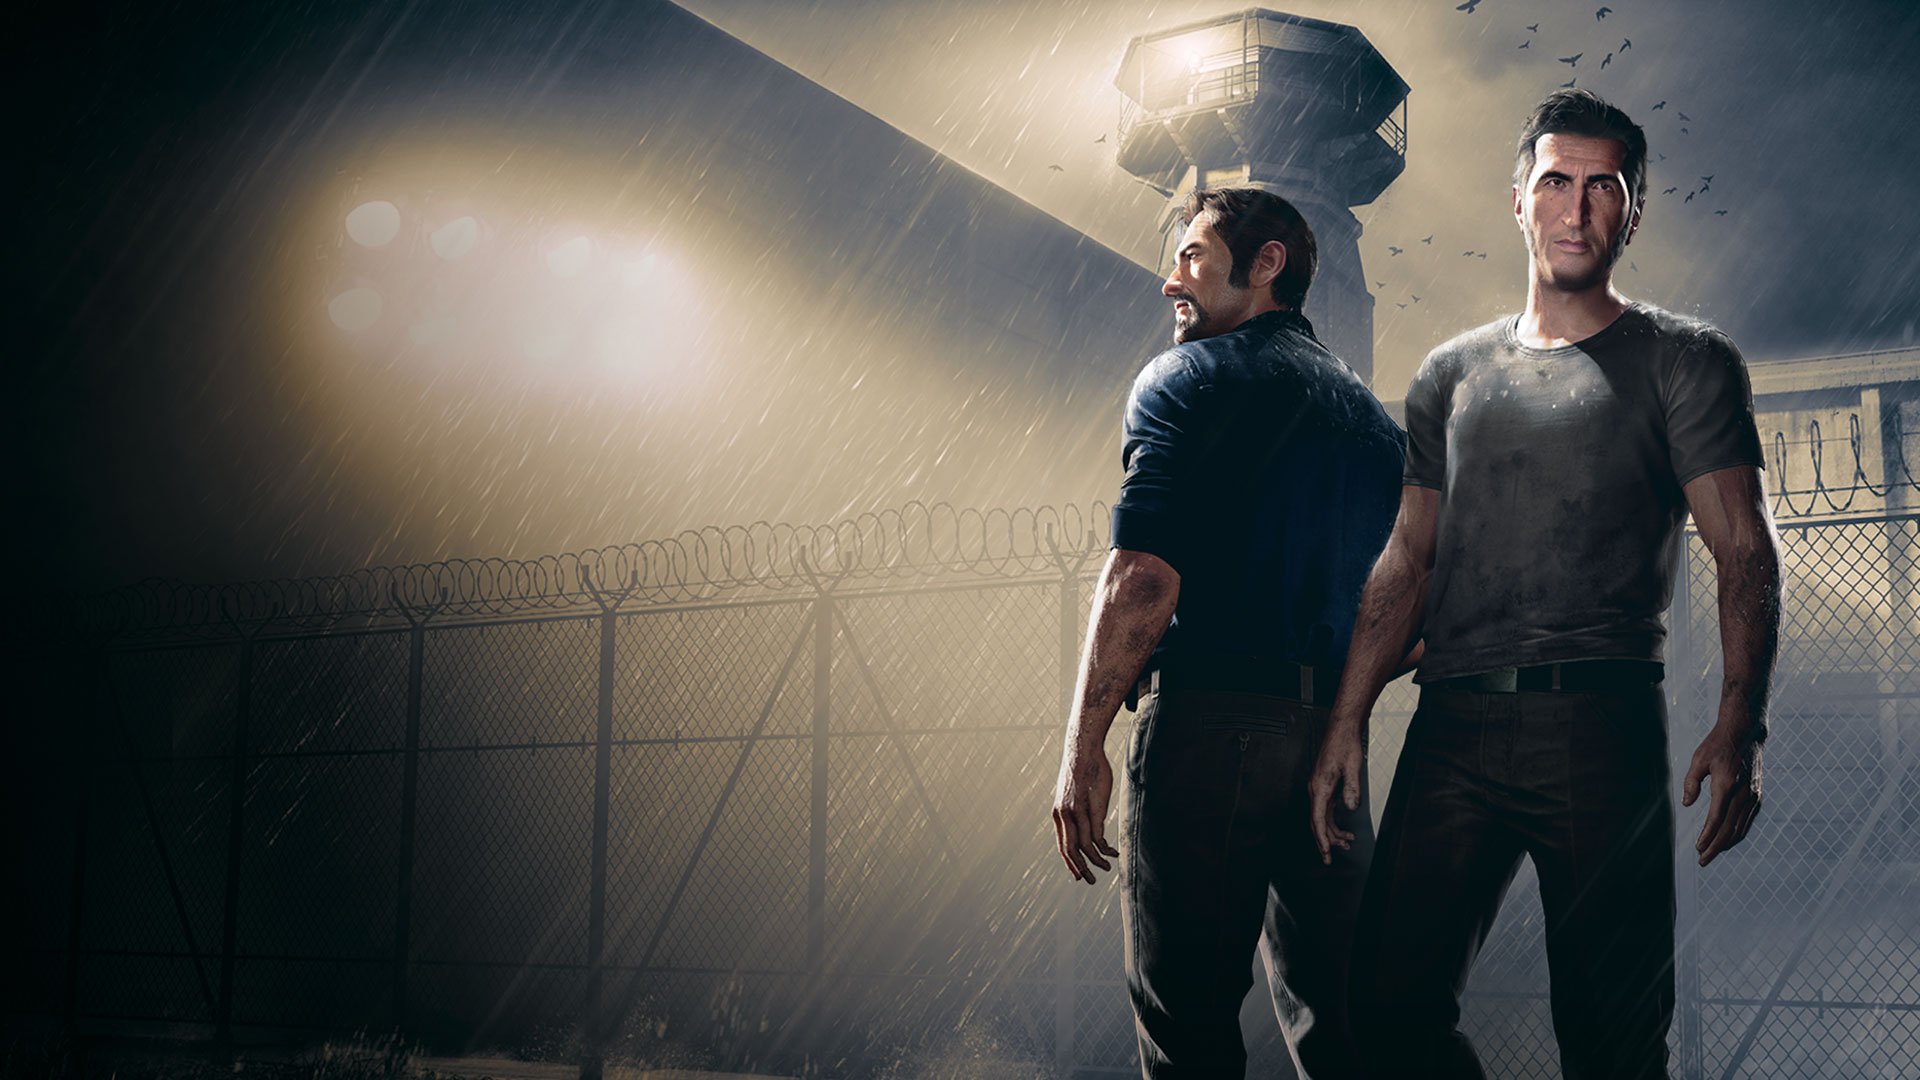 A way out джойстик. A way out ps4 геймплей. Лео из игры a way out. A way out Винсент. A way out обложка.